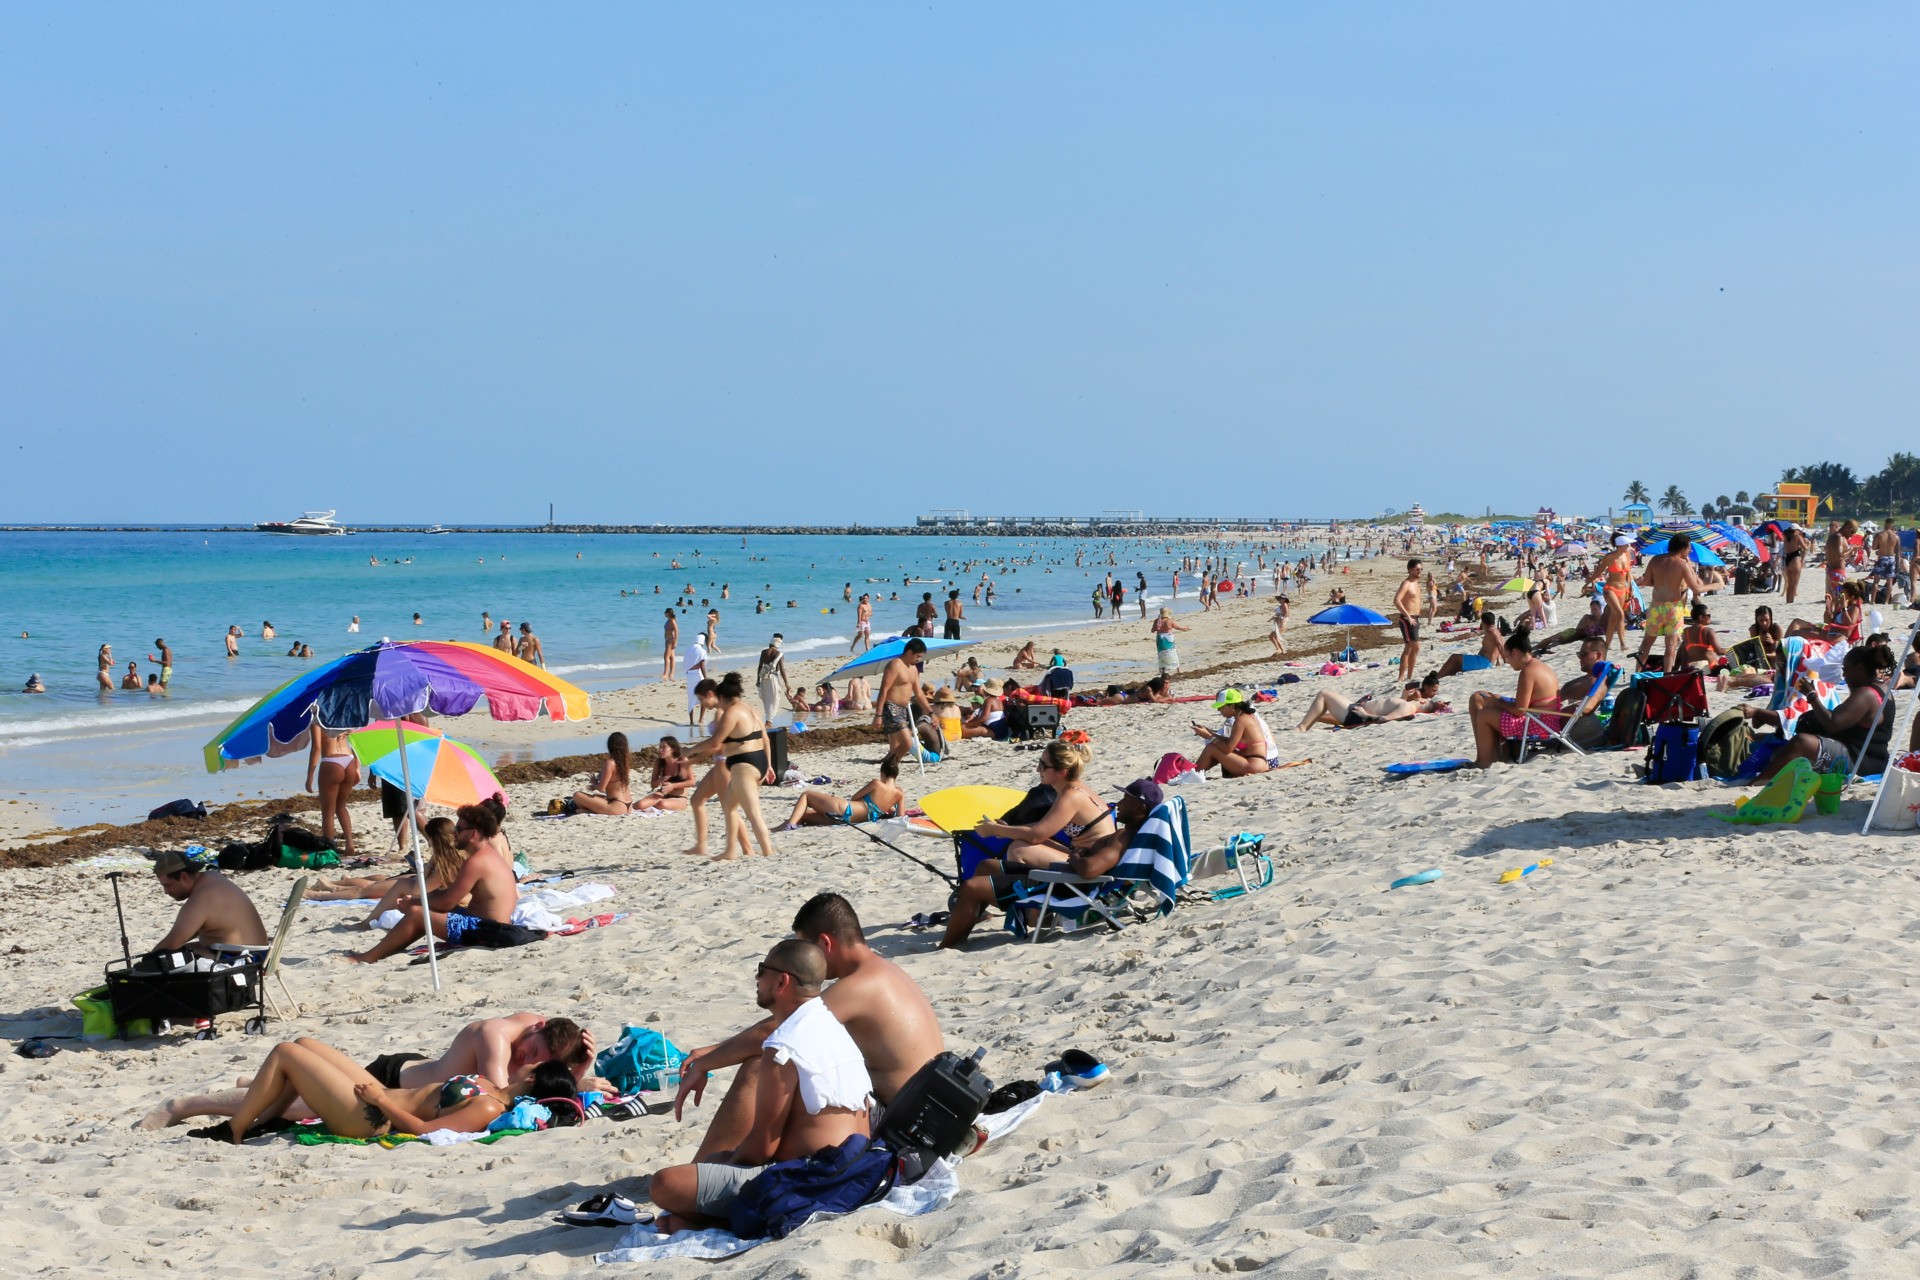 Beachgoers take advantage of the opening of South Beach on June 10, 2020 in Miami Beach, Florida. Miami-Dade county and the City of Miami opened their beaches today as the area eases restrictions put in place to contain COVID-19. (Photo by Cliff Hawkins/Getty Images)